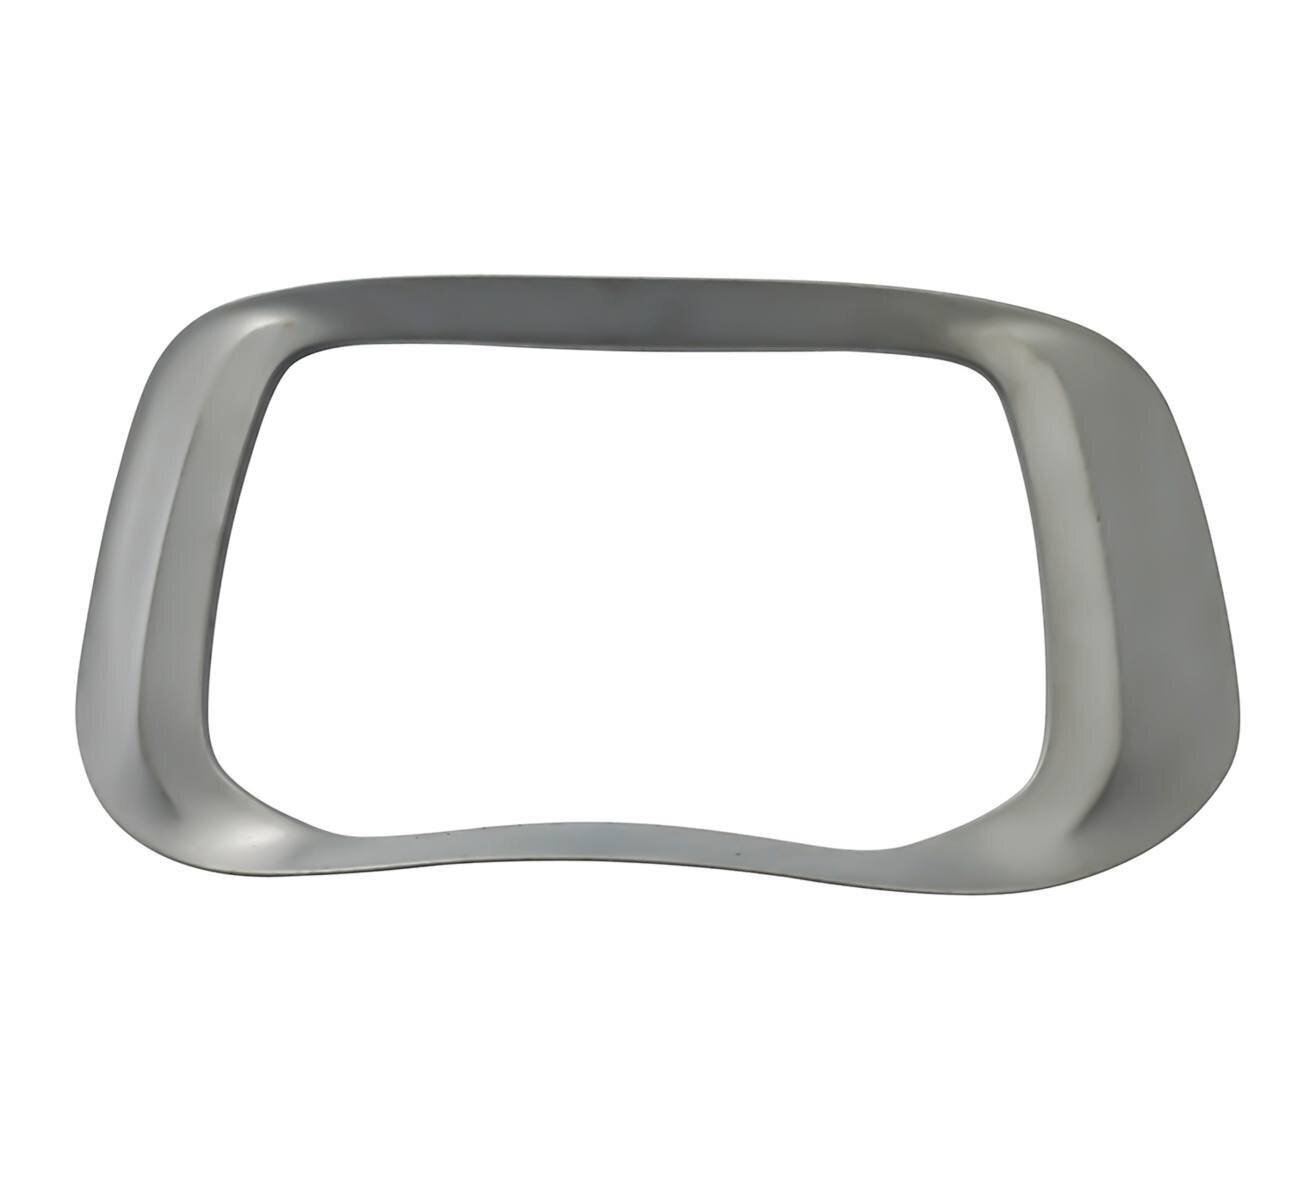 3M front cover, silver #772000